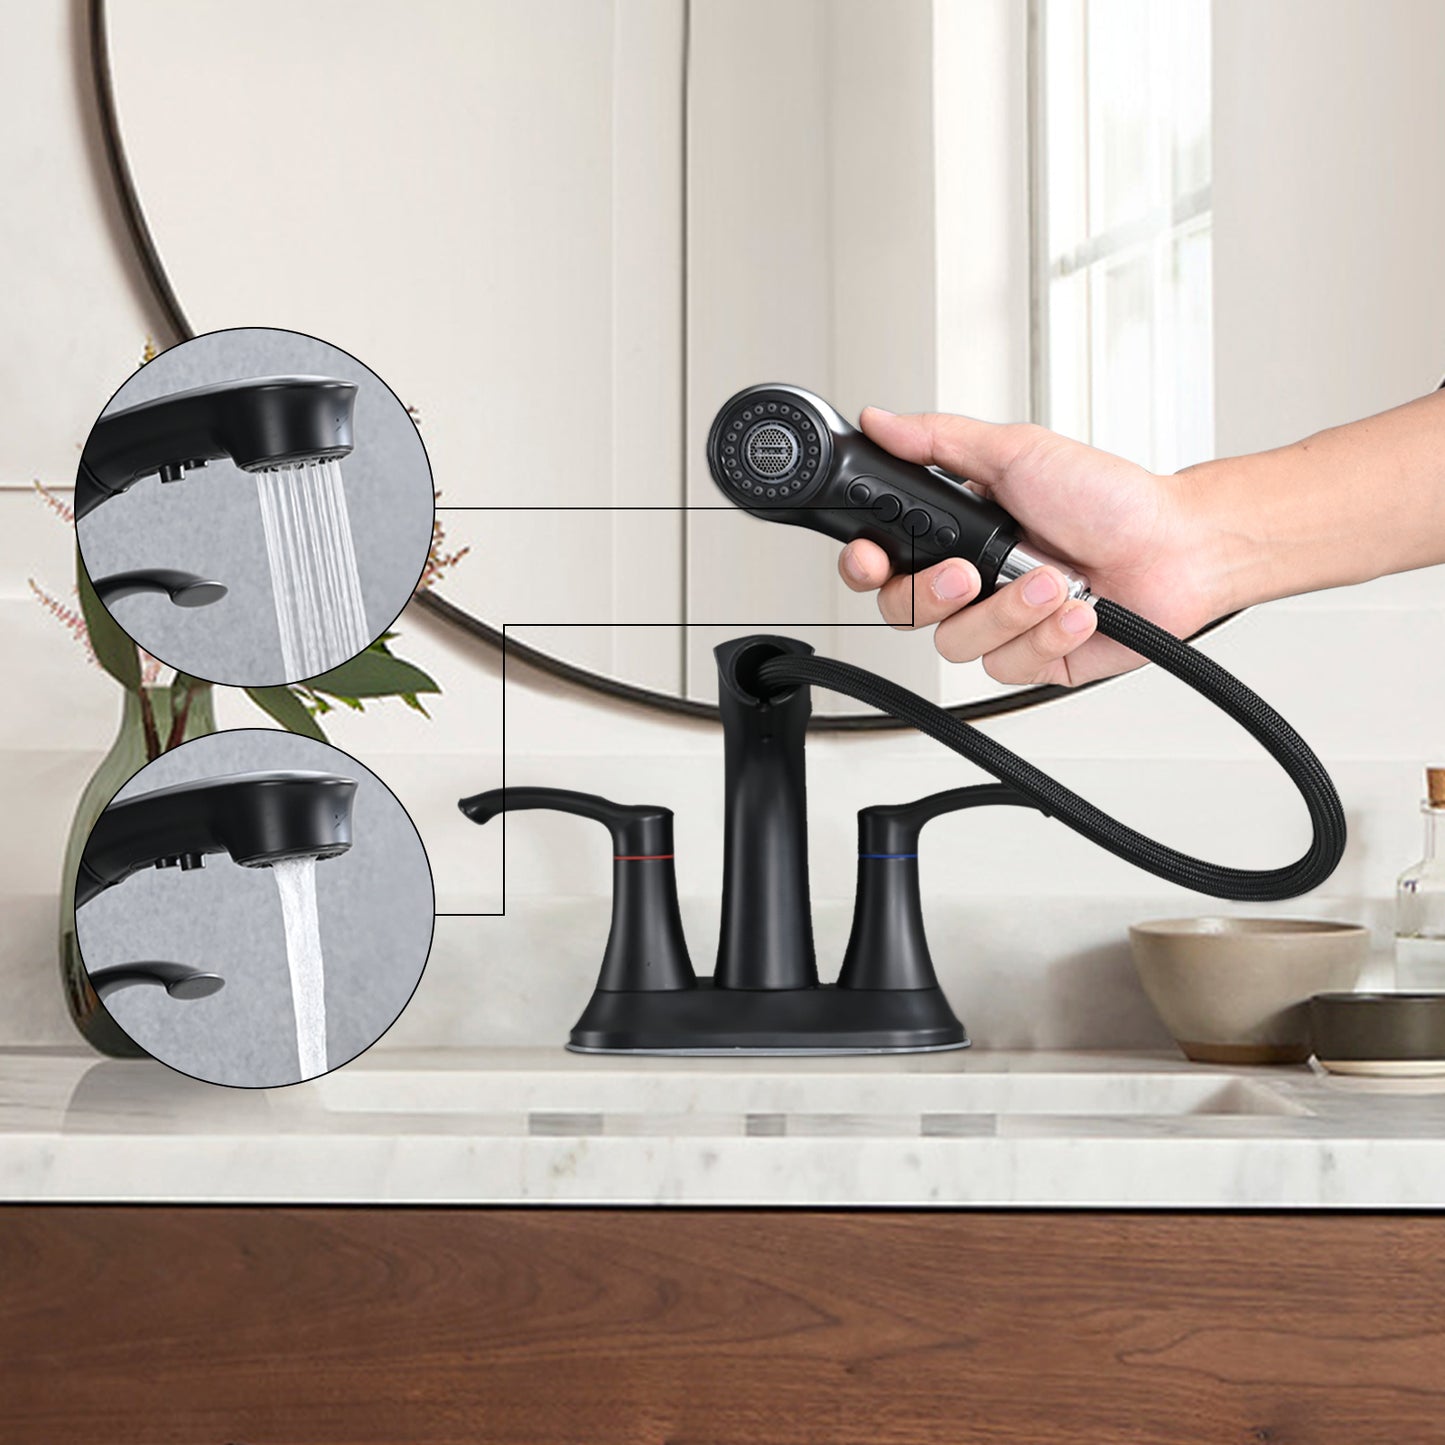 Matte Black 4-Inch Centerset Bathroom Sink Faucet with Pull-Out Sprayer